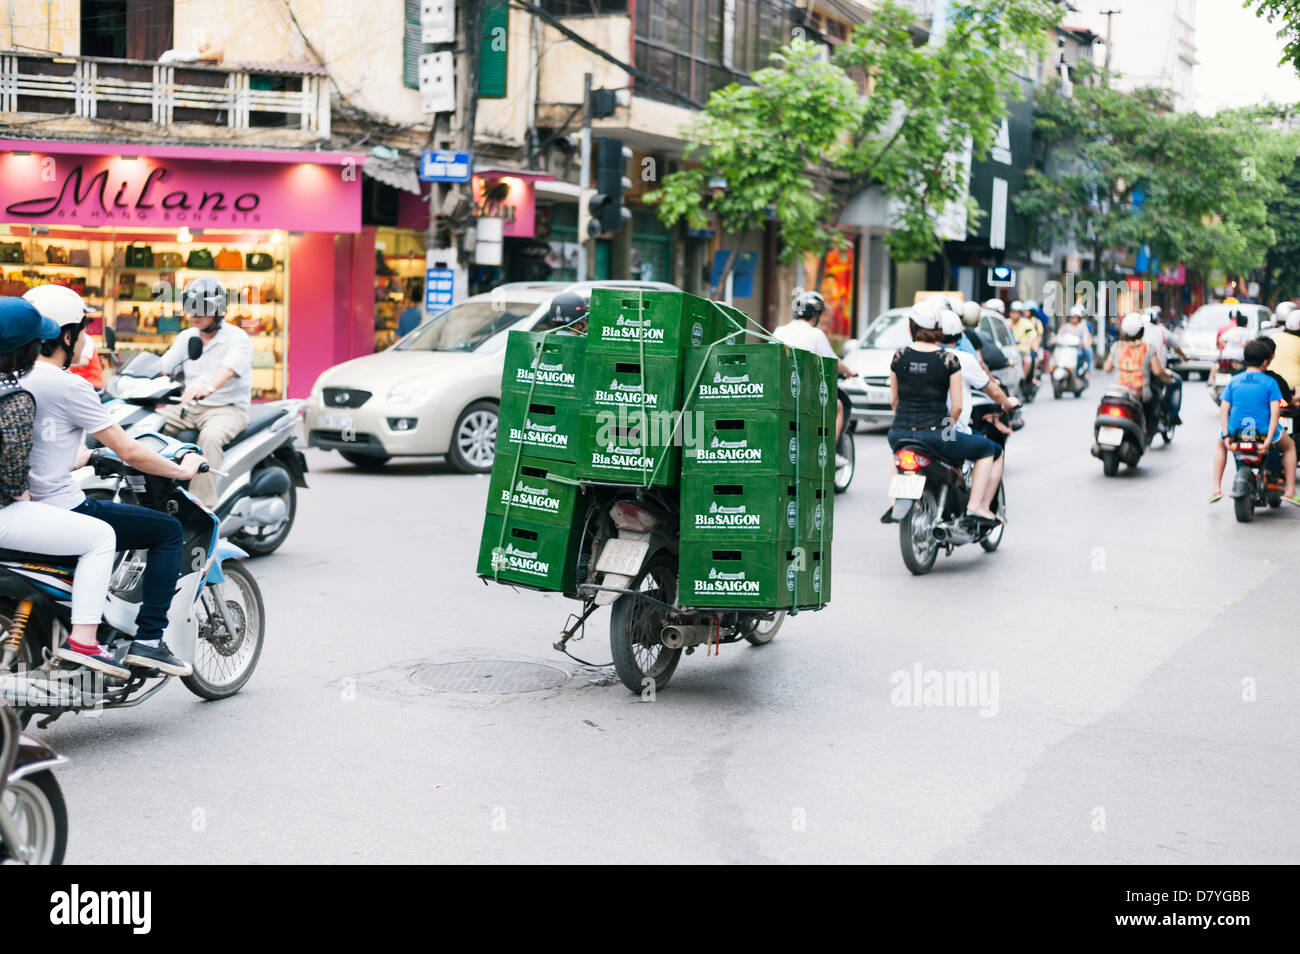 Hanoi, Vietnam - crates of Vietnamese beer being transported by overloaded motor scooter Stock Photo